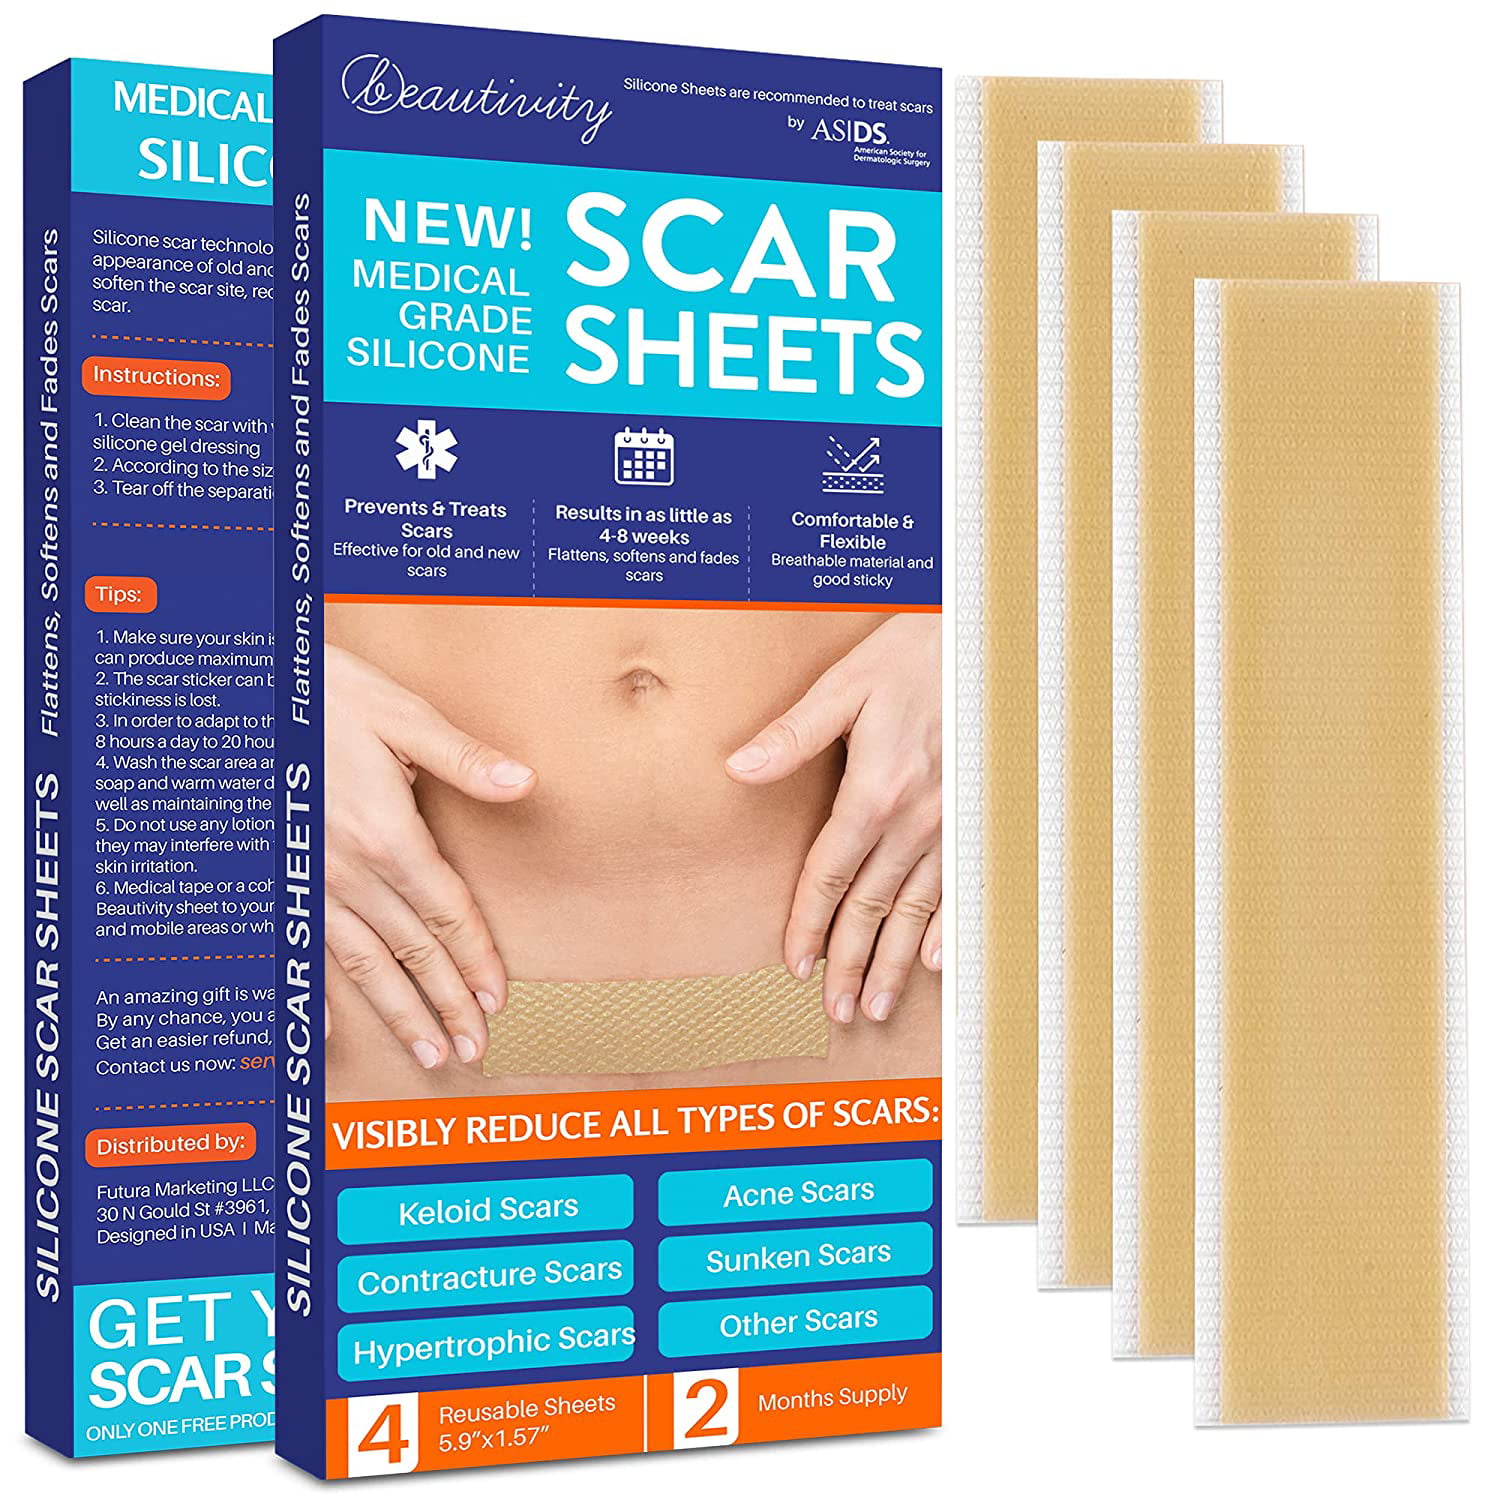 6-Pack Silicone Scar Sheets (1.57 * 5.9 Inches), Maskiss Silicone Scar  Removal Sheets, Ideal Scar Treatment for Surgical, Keloid, Burns,  C-Section, Trauma, Silicone Sheets for Scars Reusable Classic Sheets